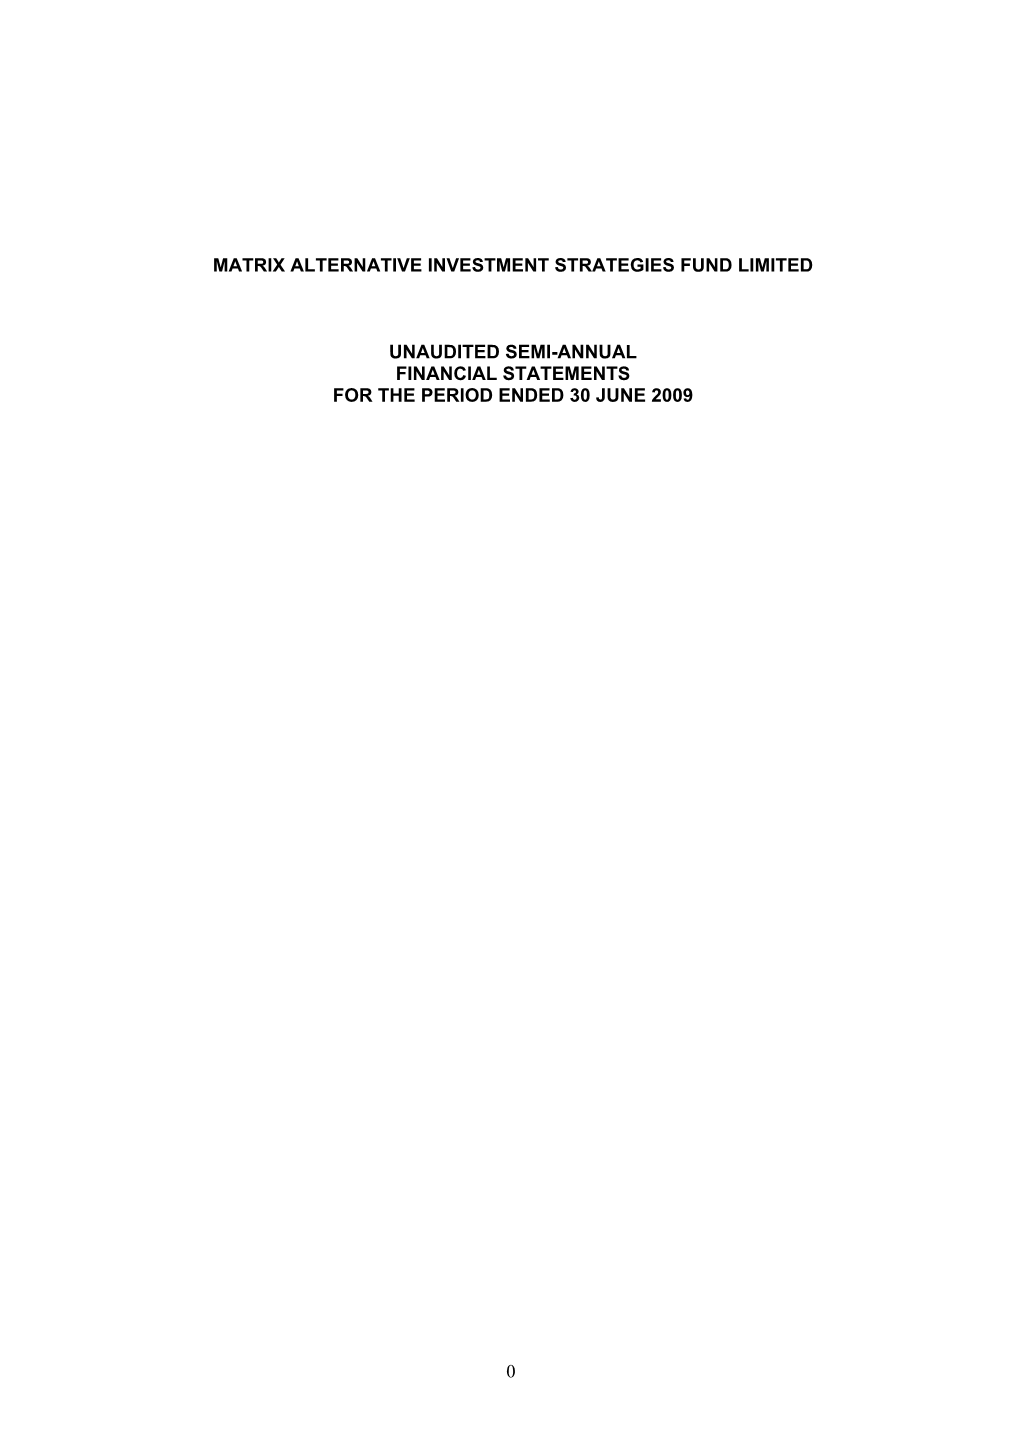 0 Matrix Alternative Investment Strategies Fund Limited Financial Statements for the Period Ended 30 June 2009